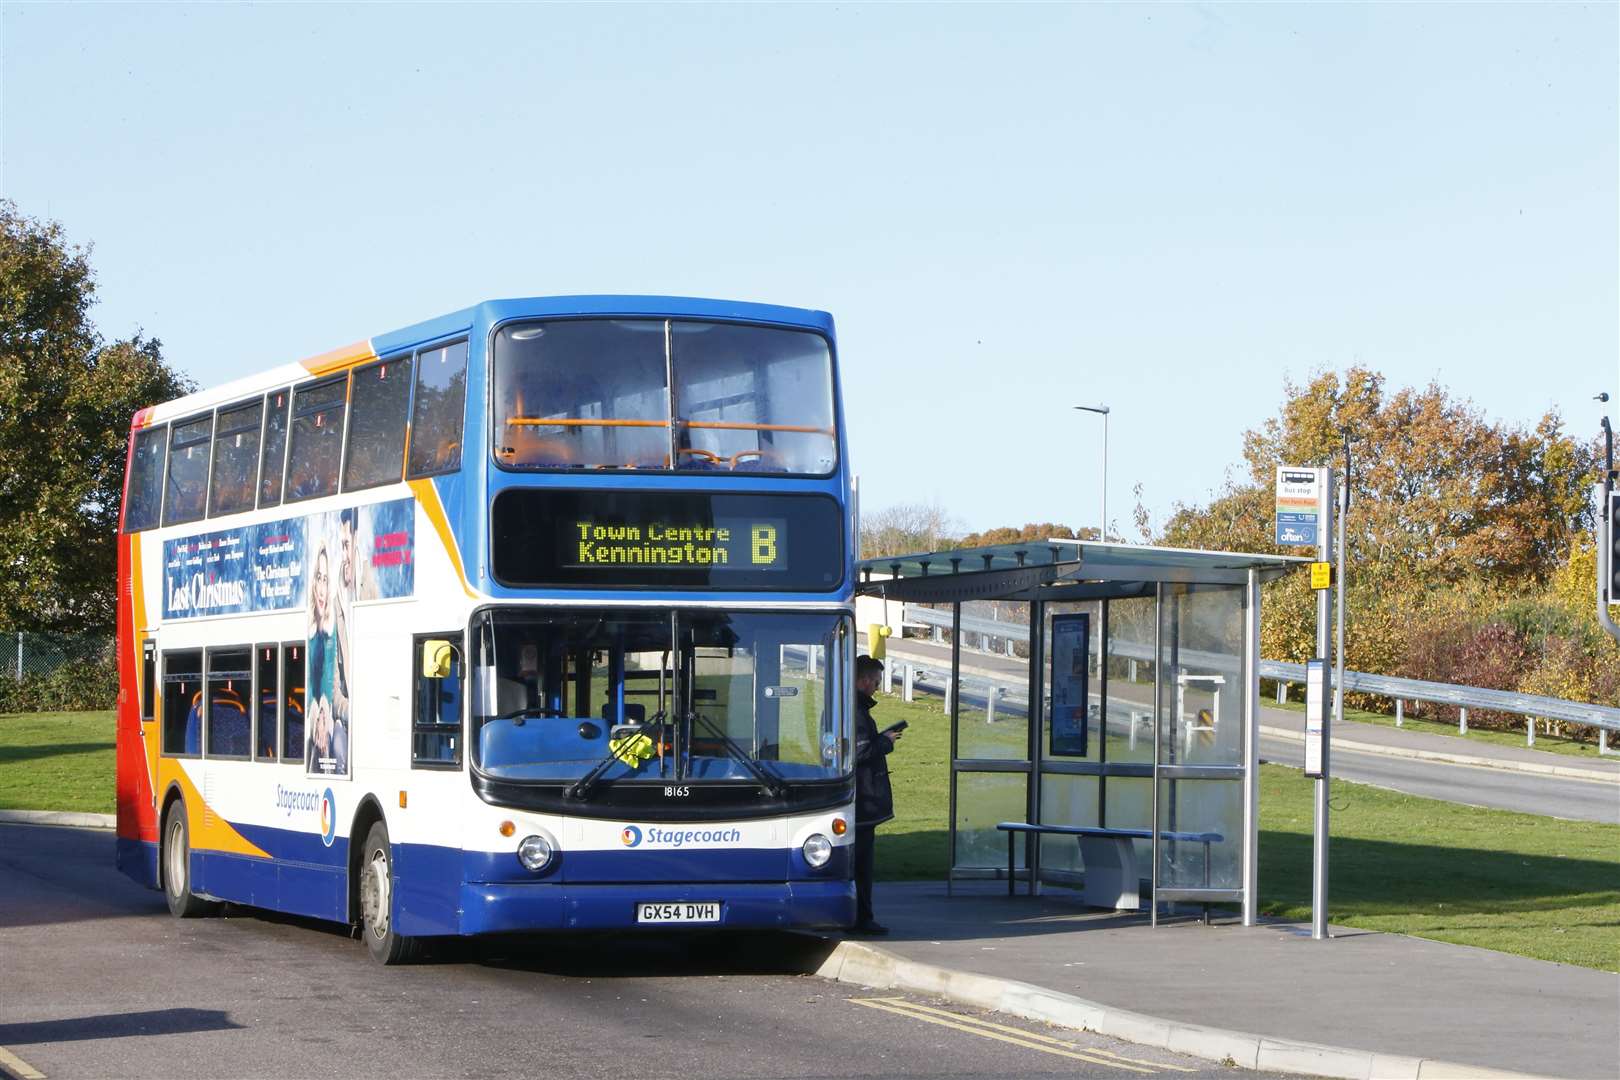 Stagecoach is offering free travel to NHS workers in the south east